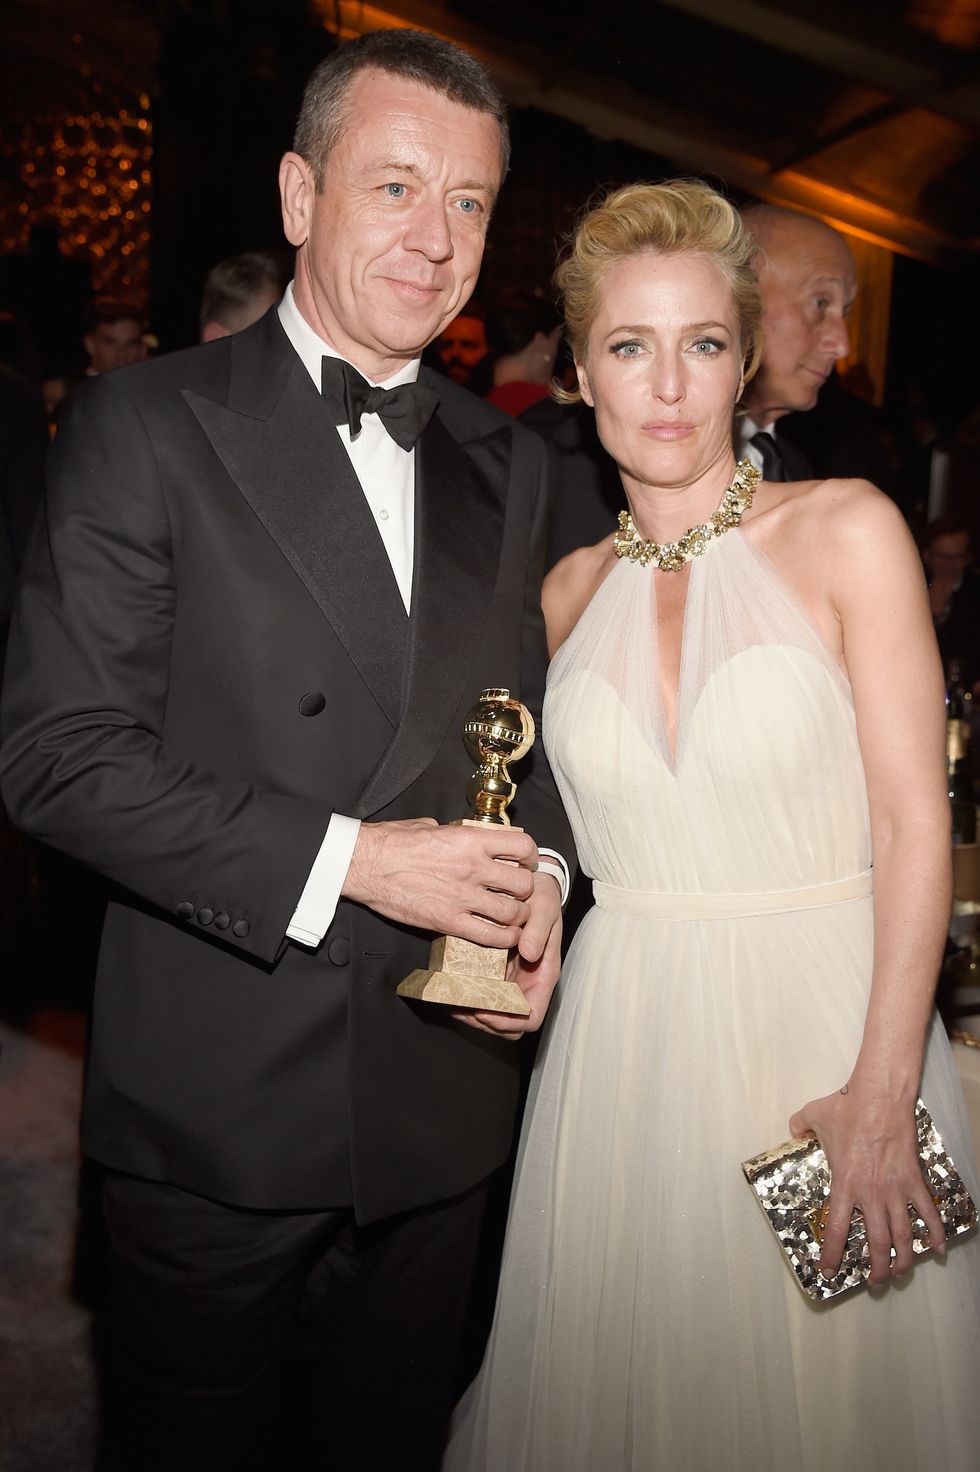 Peter Morgan and actress Gillian Anderson attend The Weinstein Company and Netflix Golden Globe Party in January 2017 